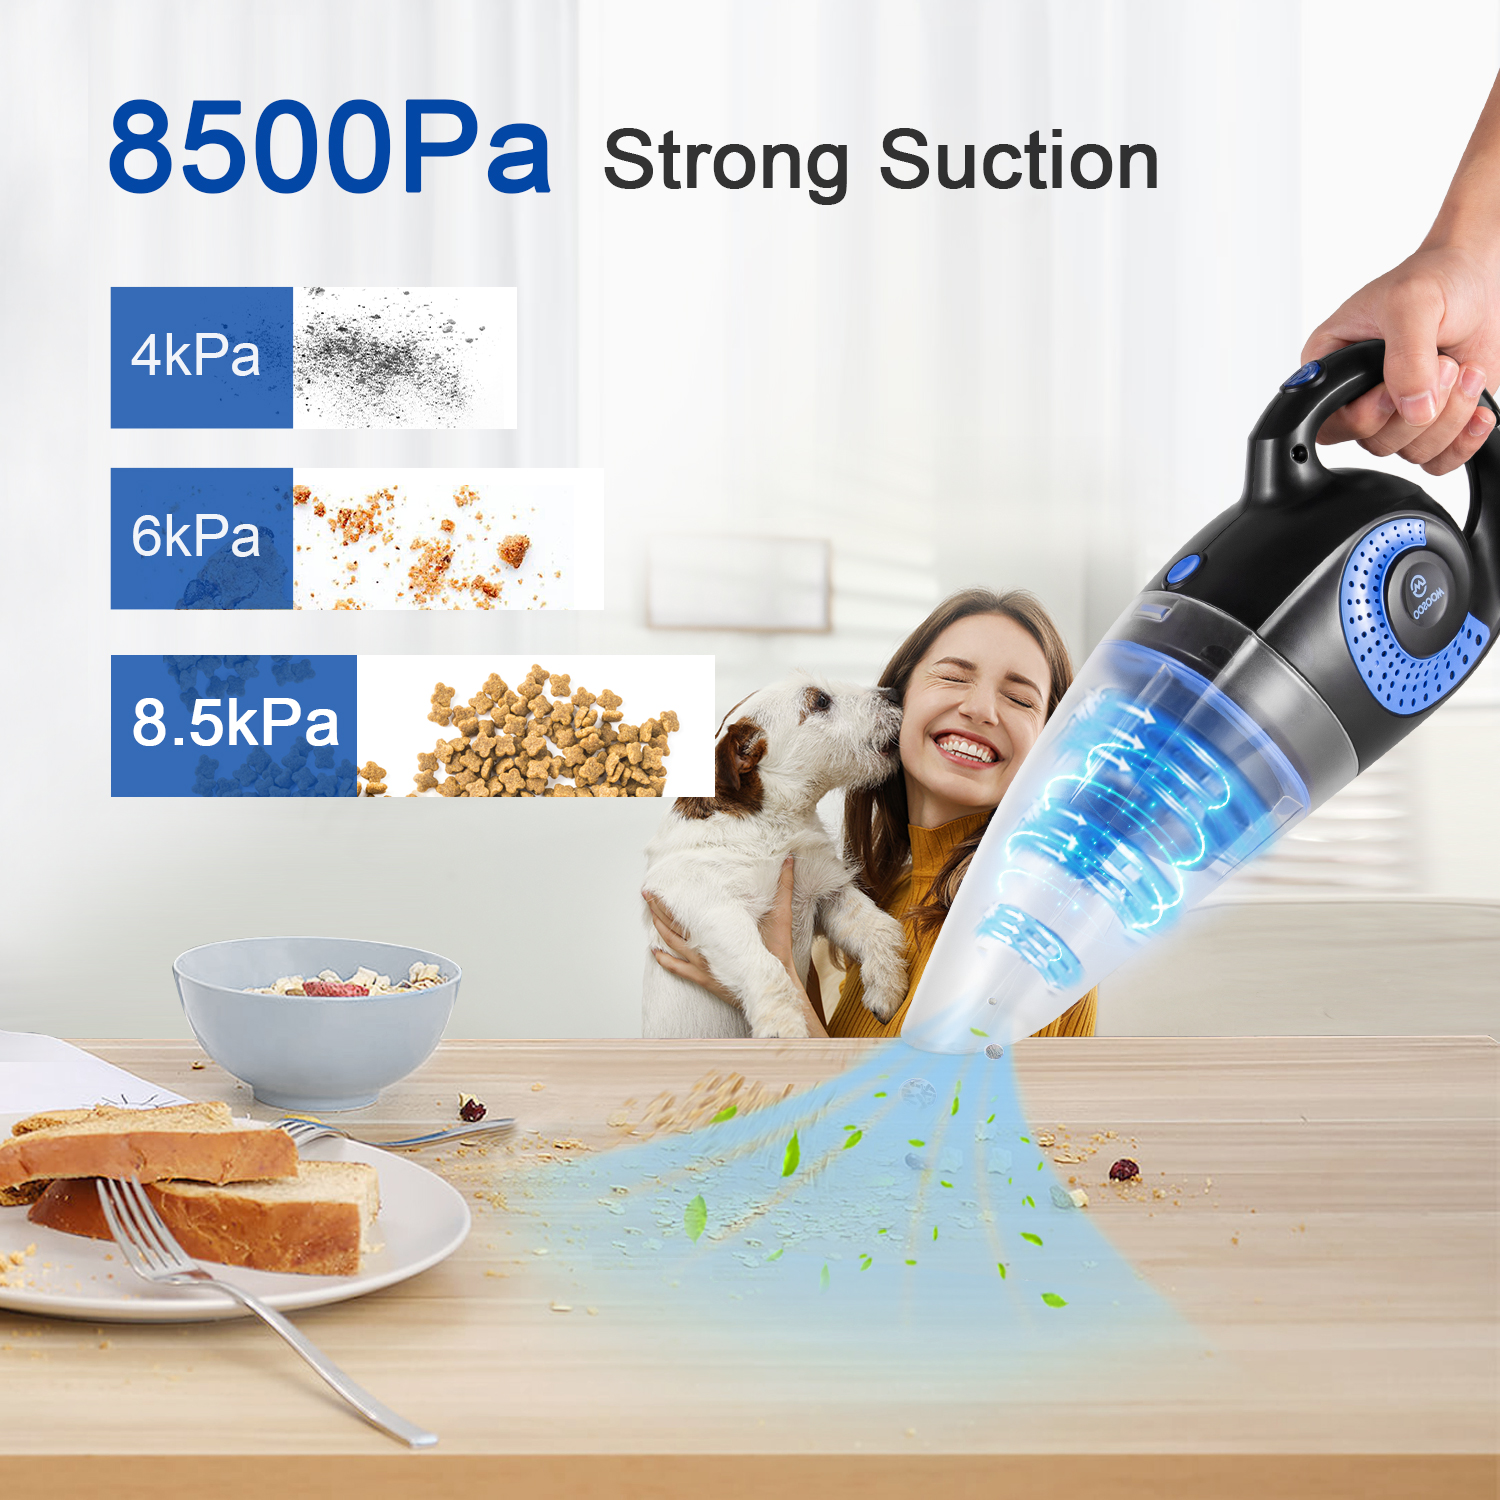 Moosoo Strong Suction handheld Vacuum Cleaner, Cordless Hand Vacuum, Rechargeable Handy Vac for Car & Pet Hair - image 3 of 7